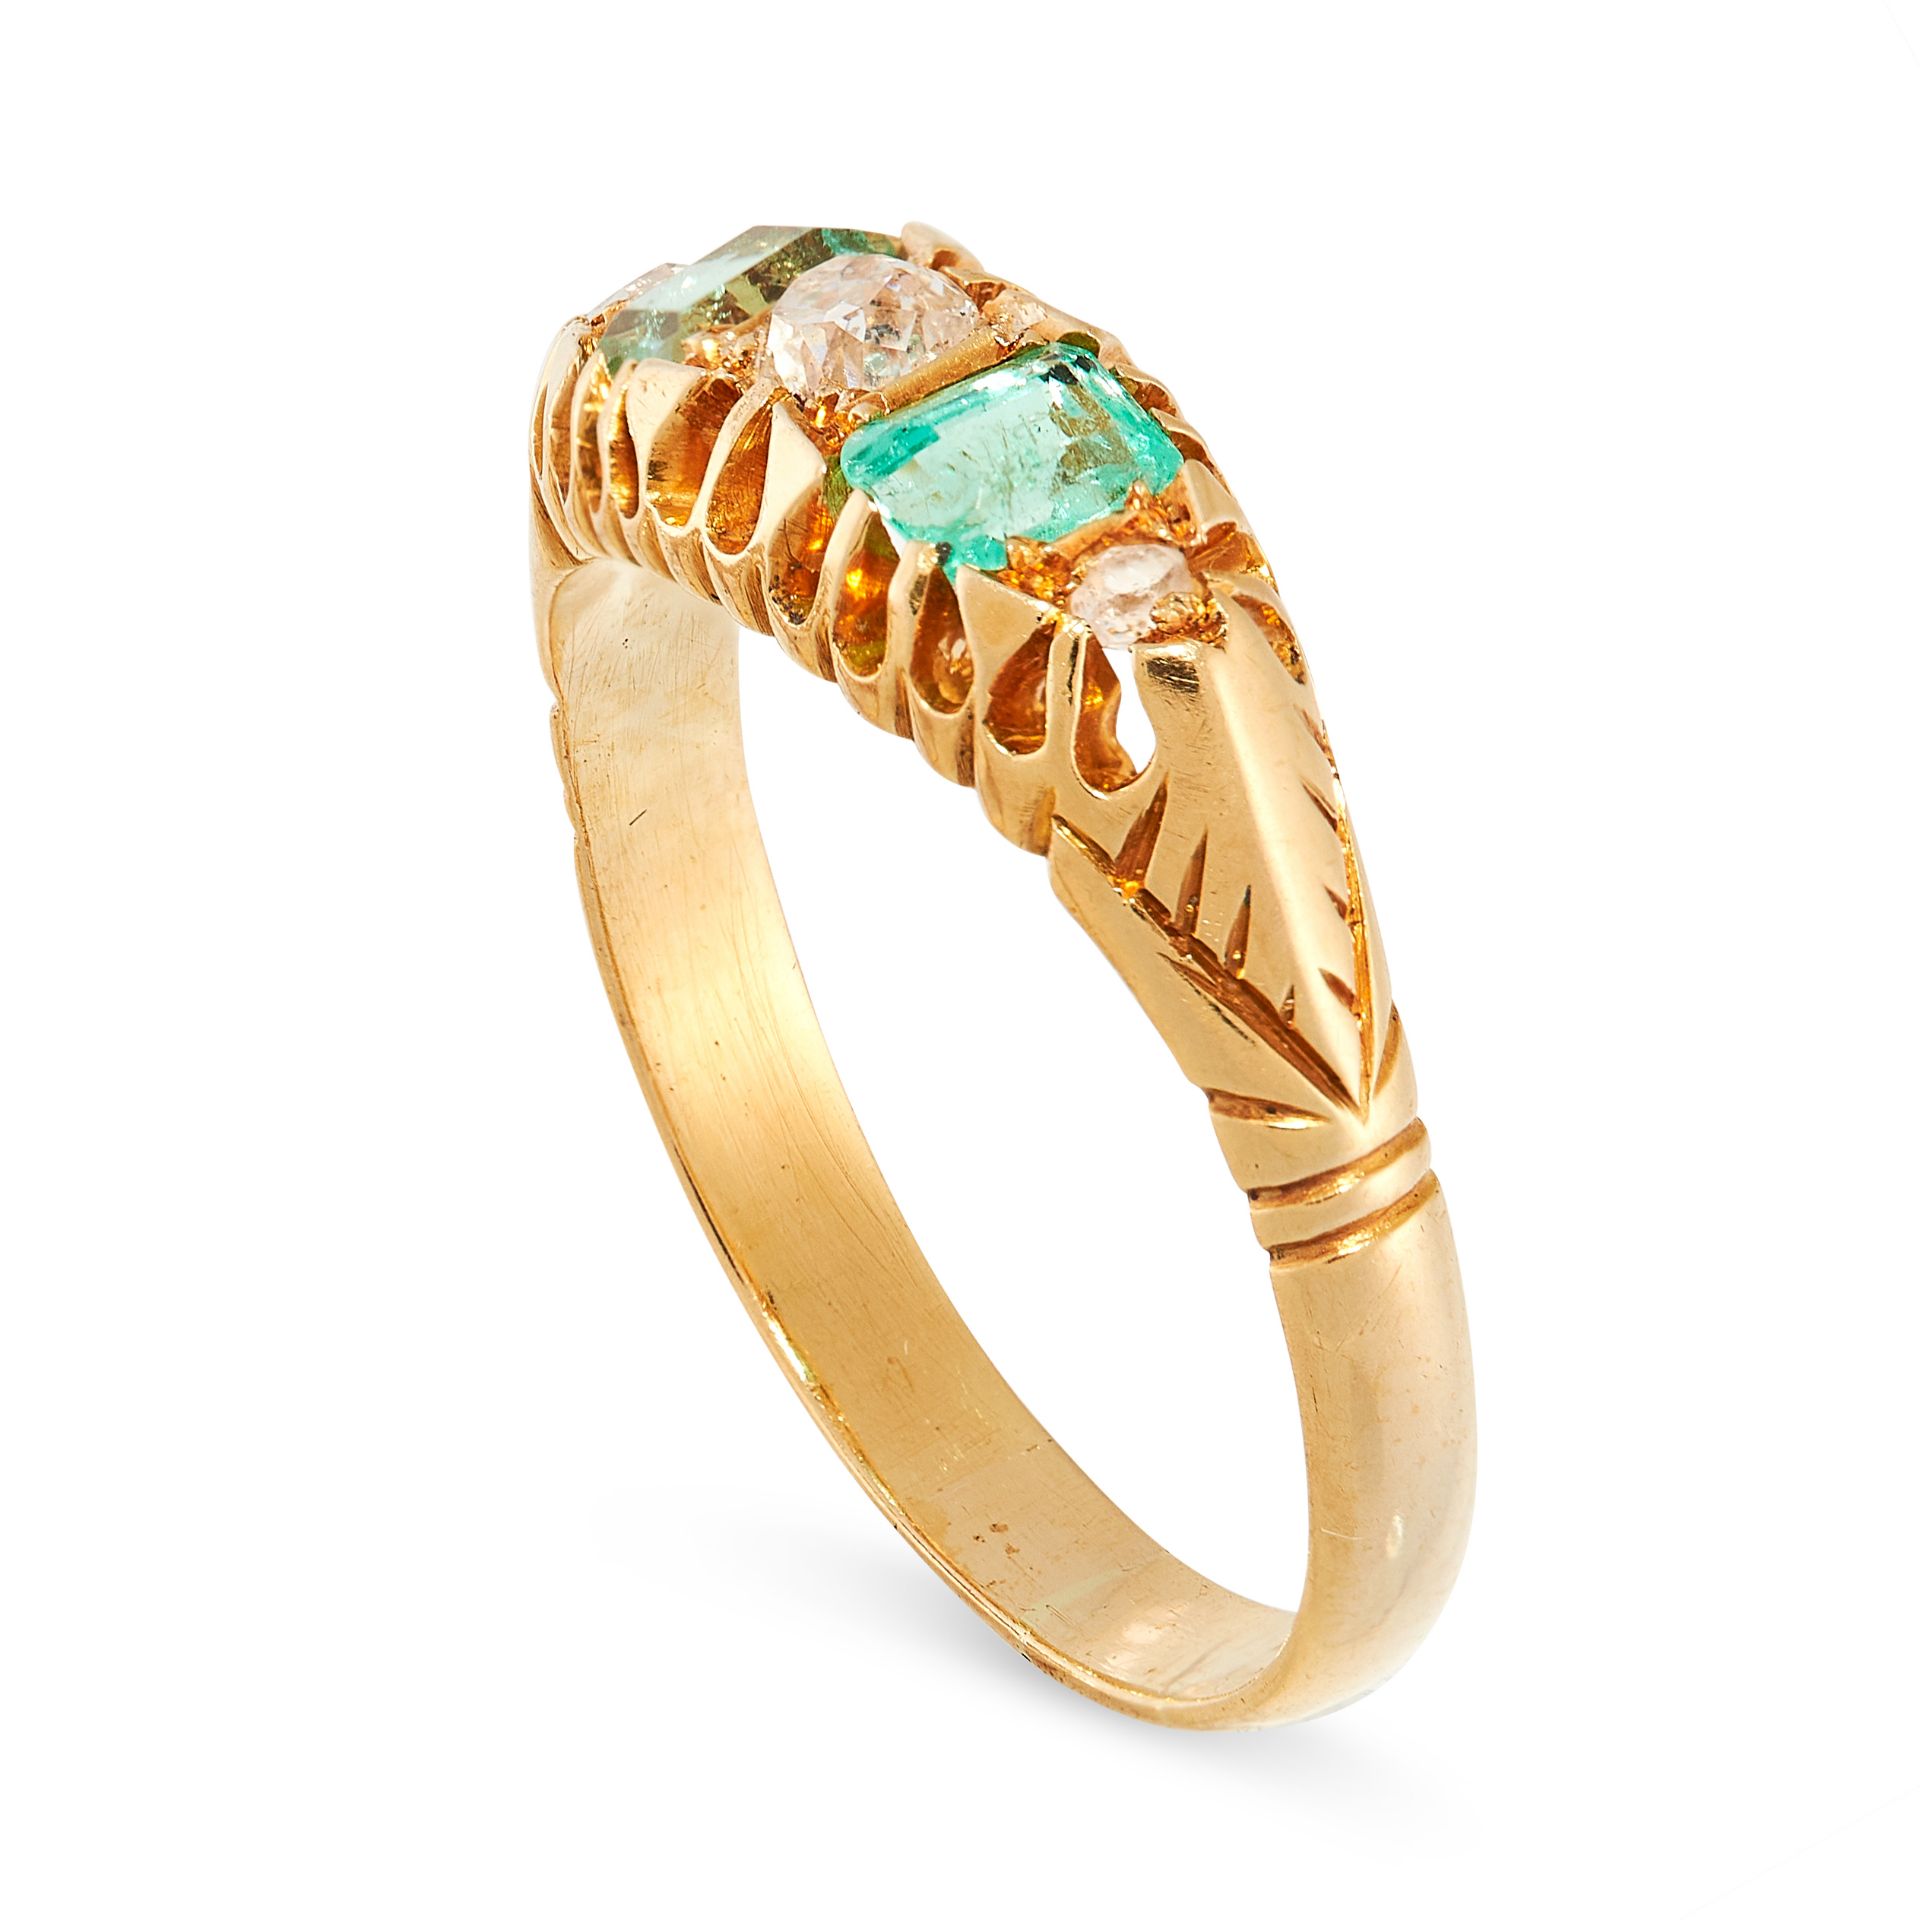 ANTIQUE EMERALD AND DIAMOND RING in 18ct yellow gold, set with two emerald cut emeralds and three - Bild 2 aus 2